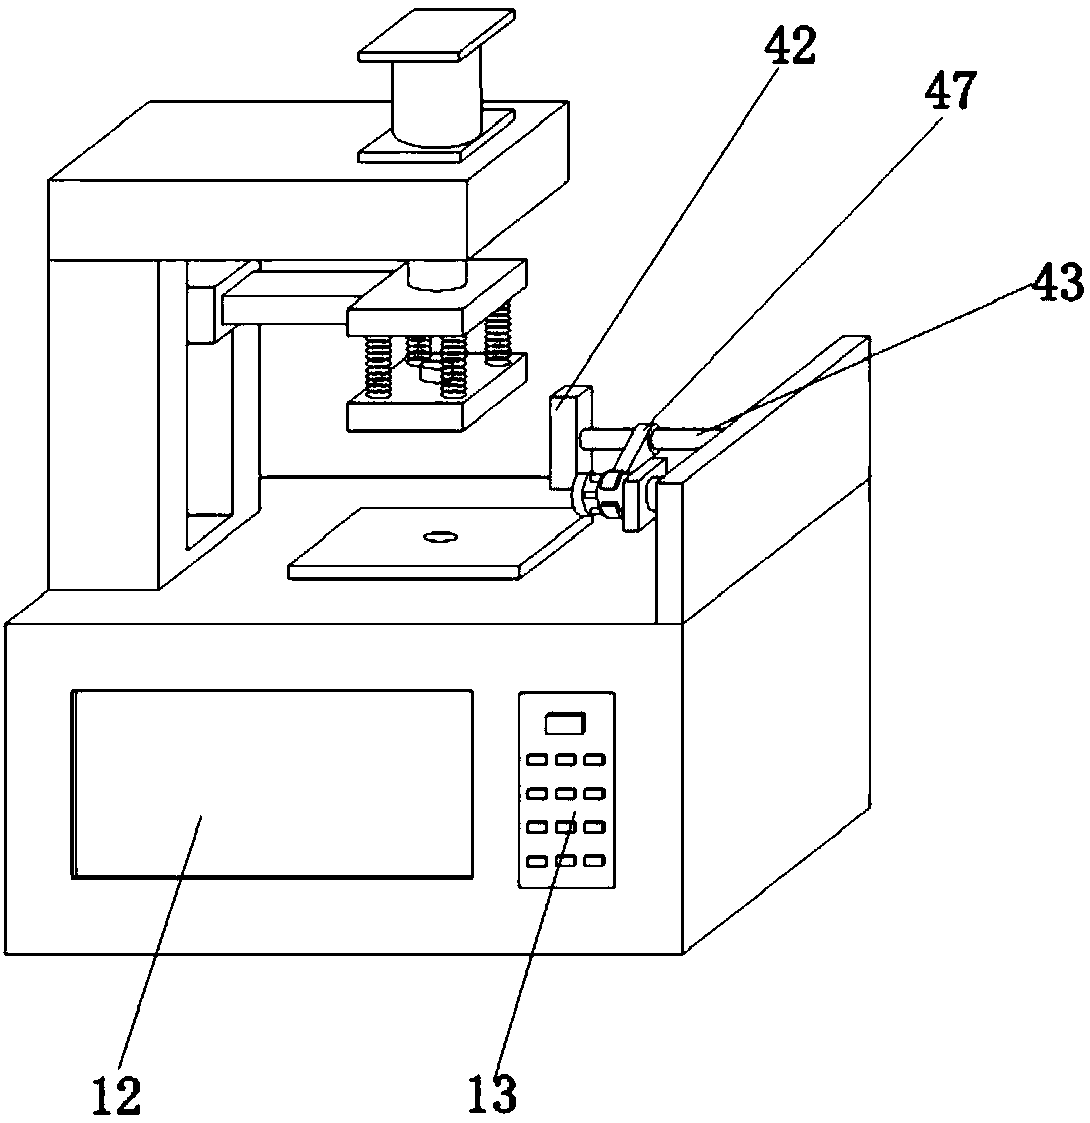 Inductance detecting device after film cracking of ferrites coating